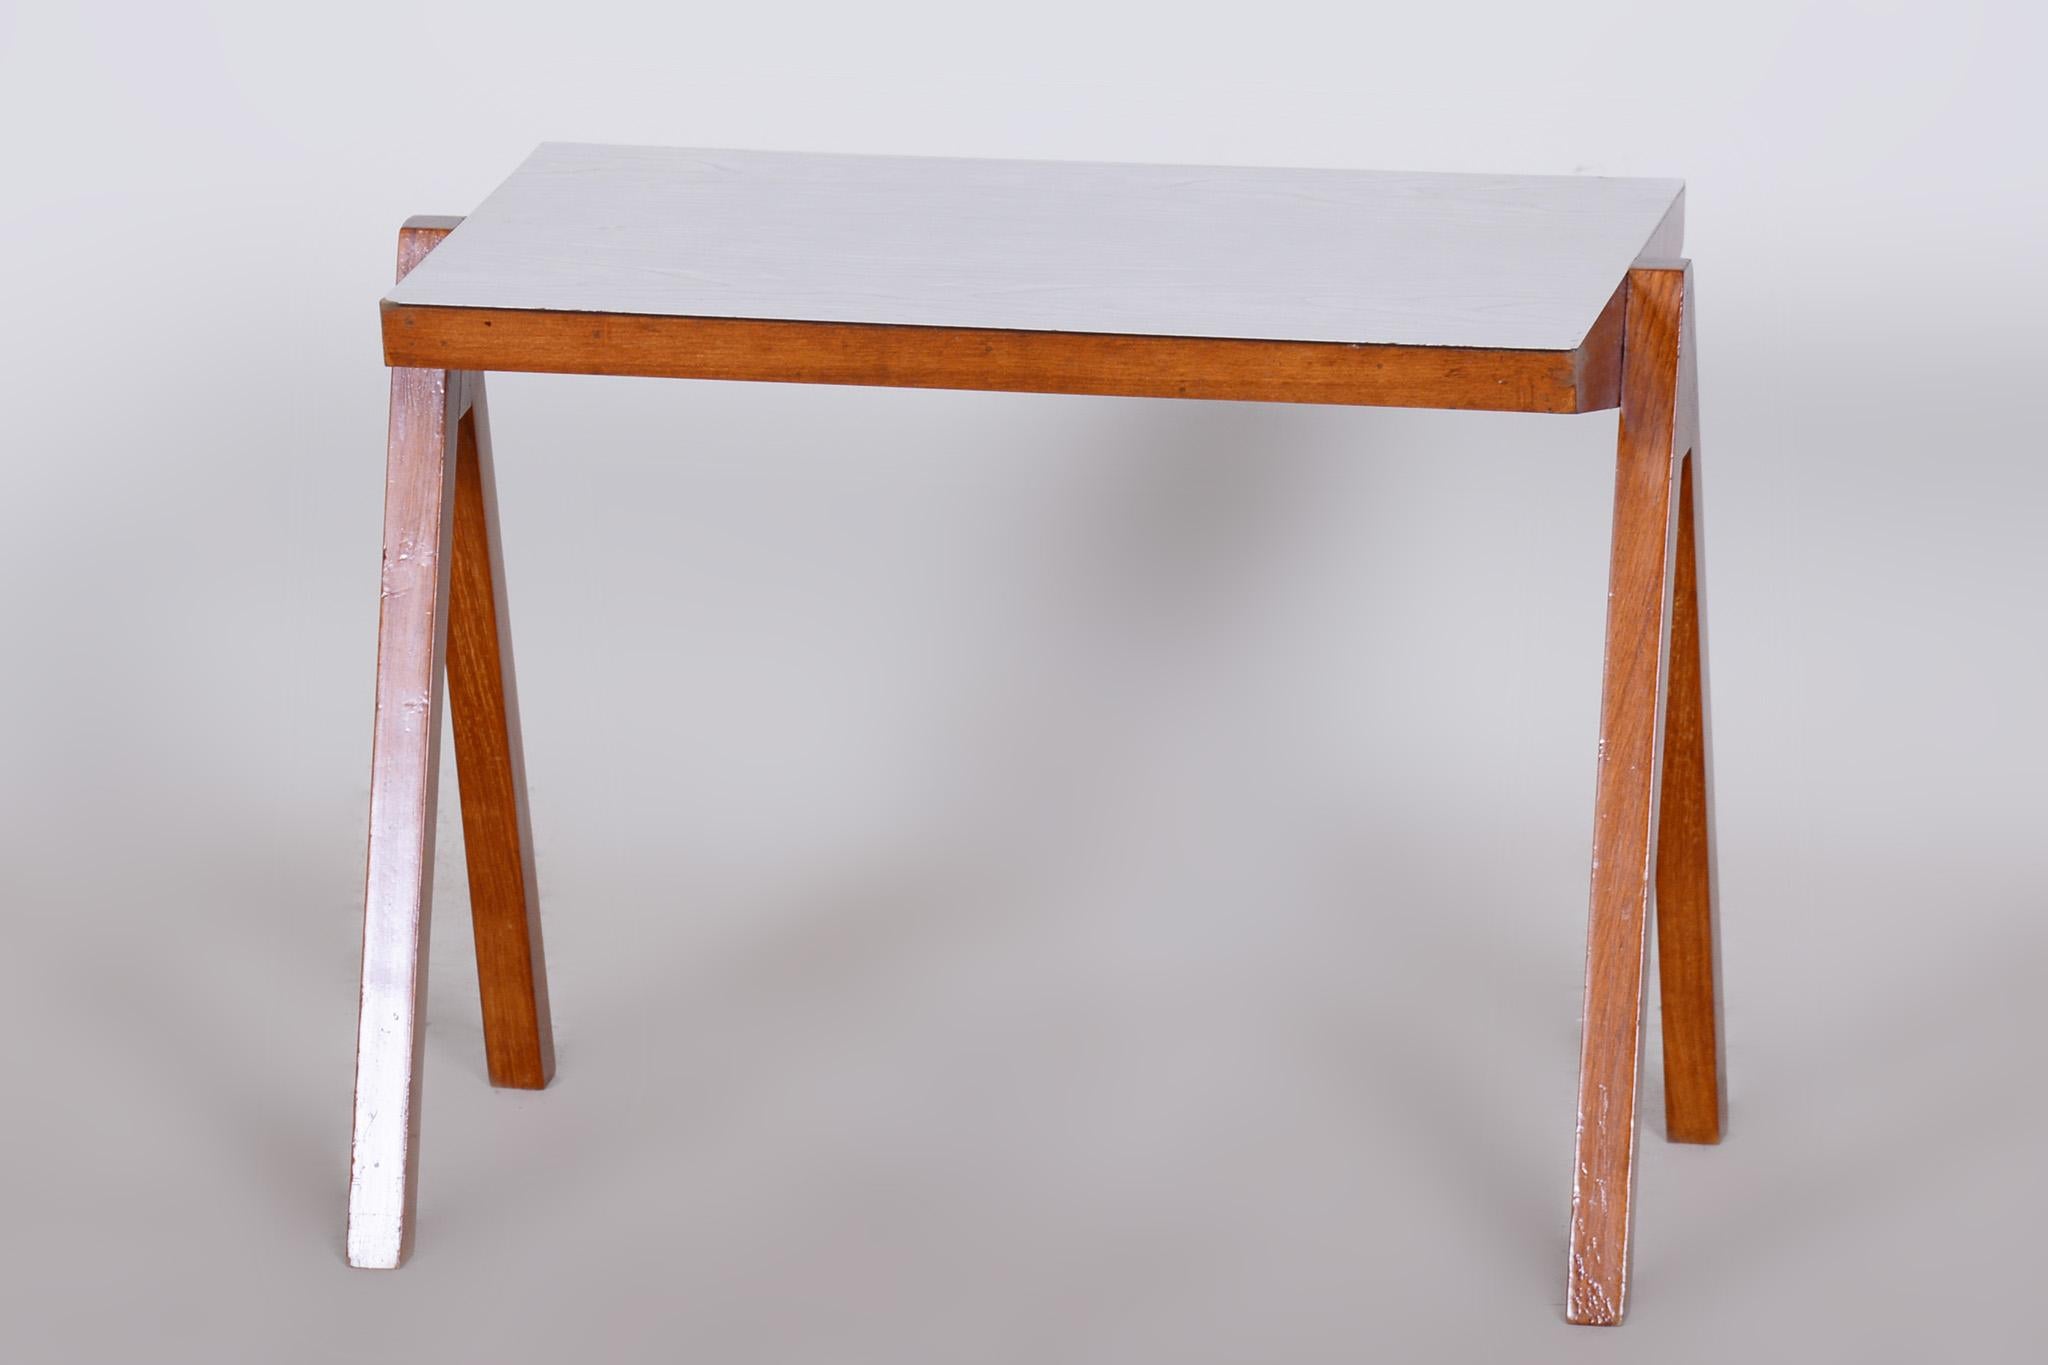 Small midcentury table.

Source: Czechia
Period: 1950-1959
Material: Beech and Umakart

Stable construction.
Refreshed polish.